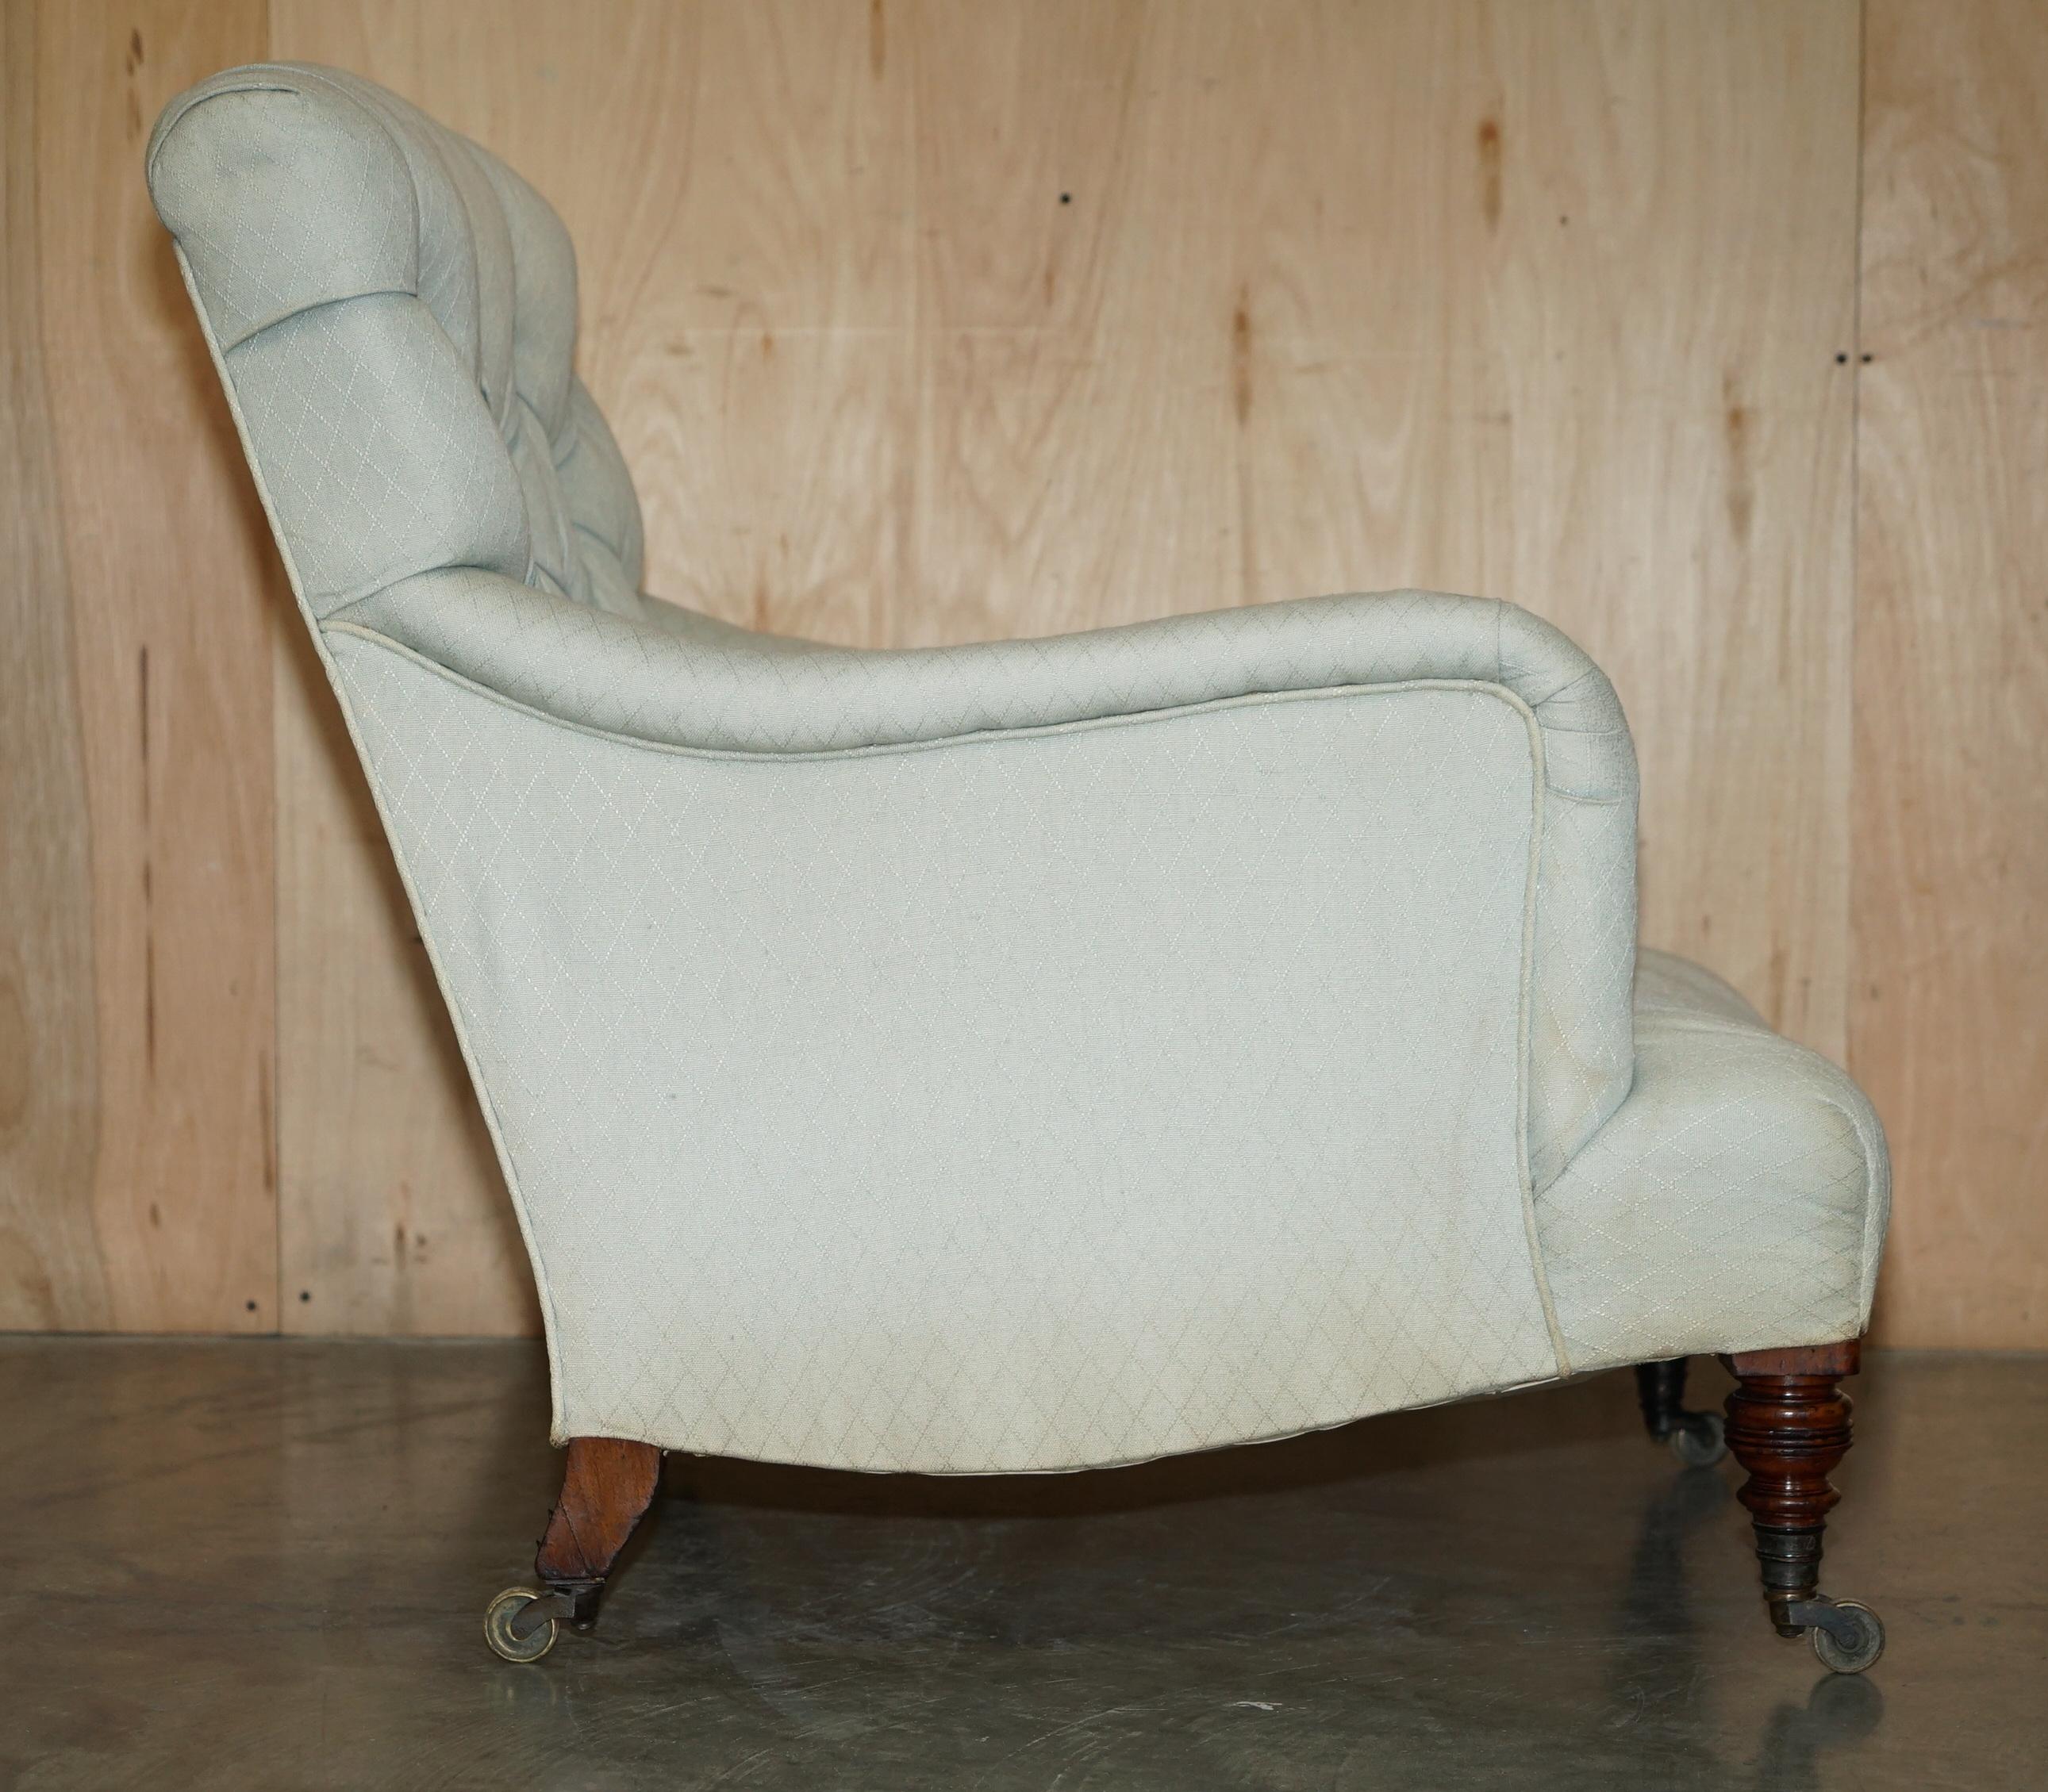 RARE ORIGINAL ViCTORIAN HOWARD & SONS BRIDGEWATER ARMCHAIR PERIOD UPHOLSTERY For Sale 2